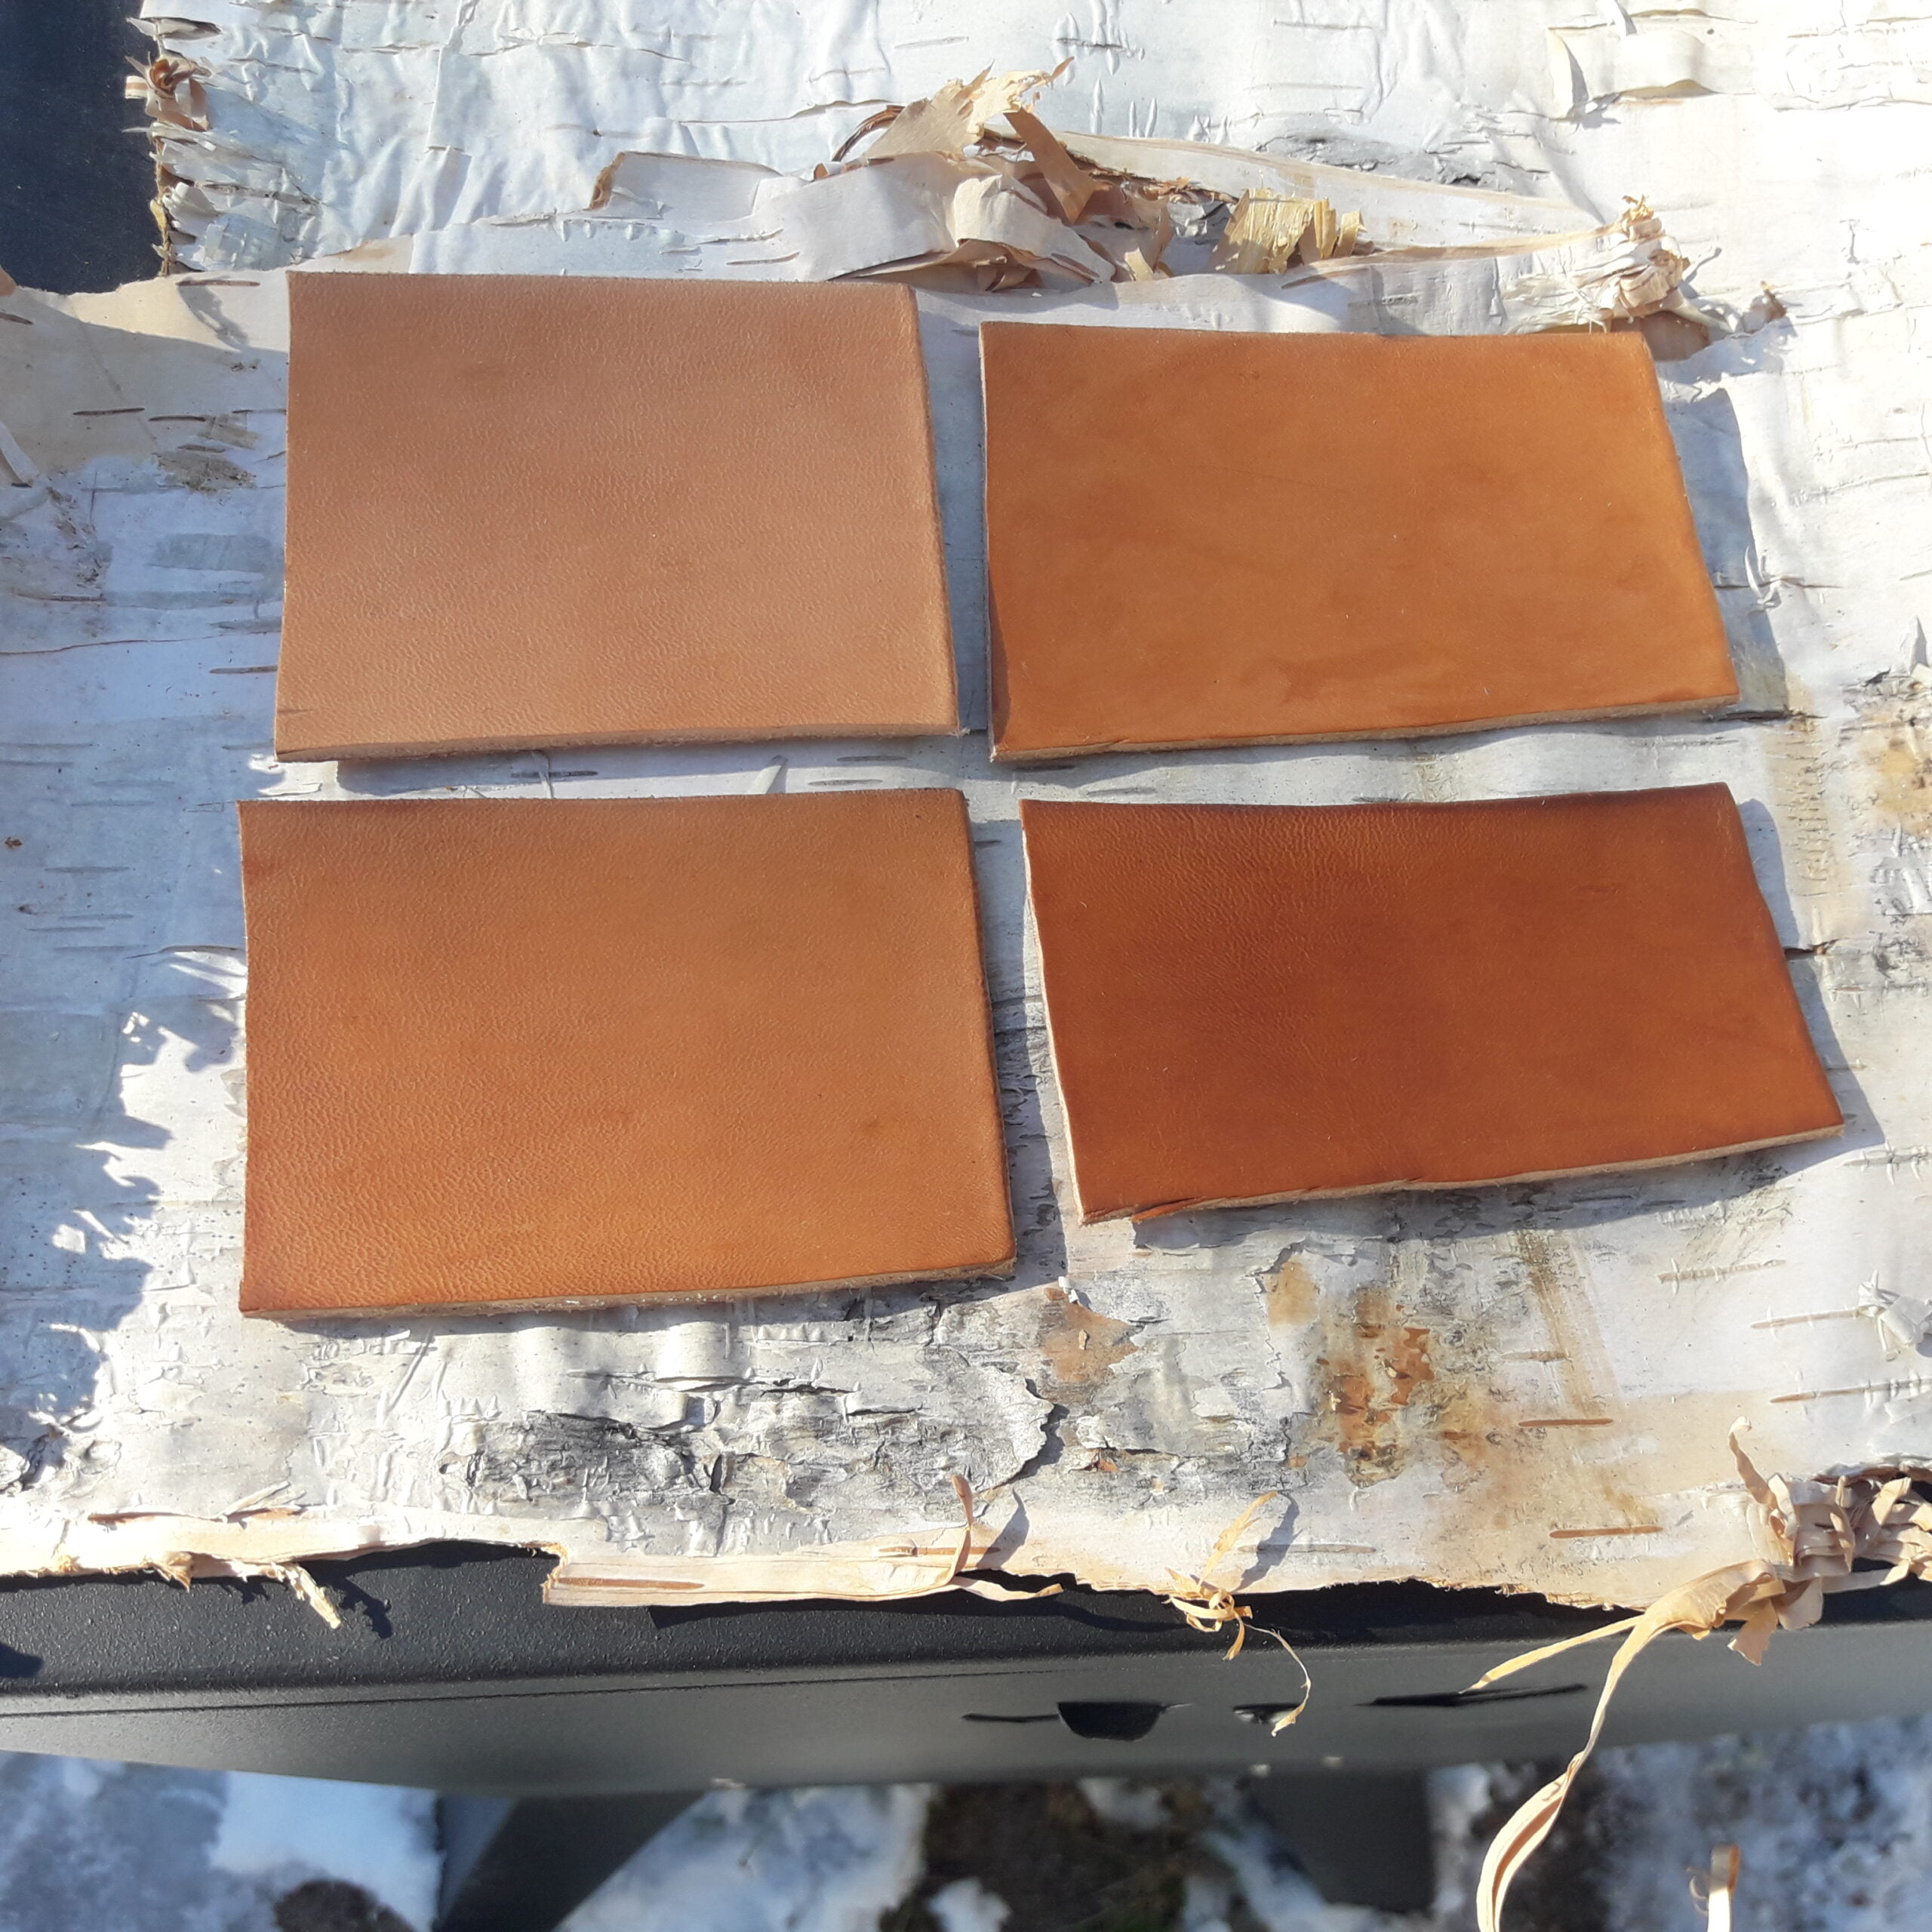 Birchees leather conditioner darkening compared to neatsfoot and mink oil